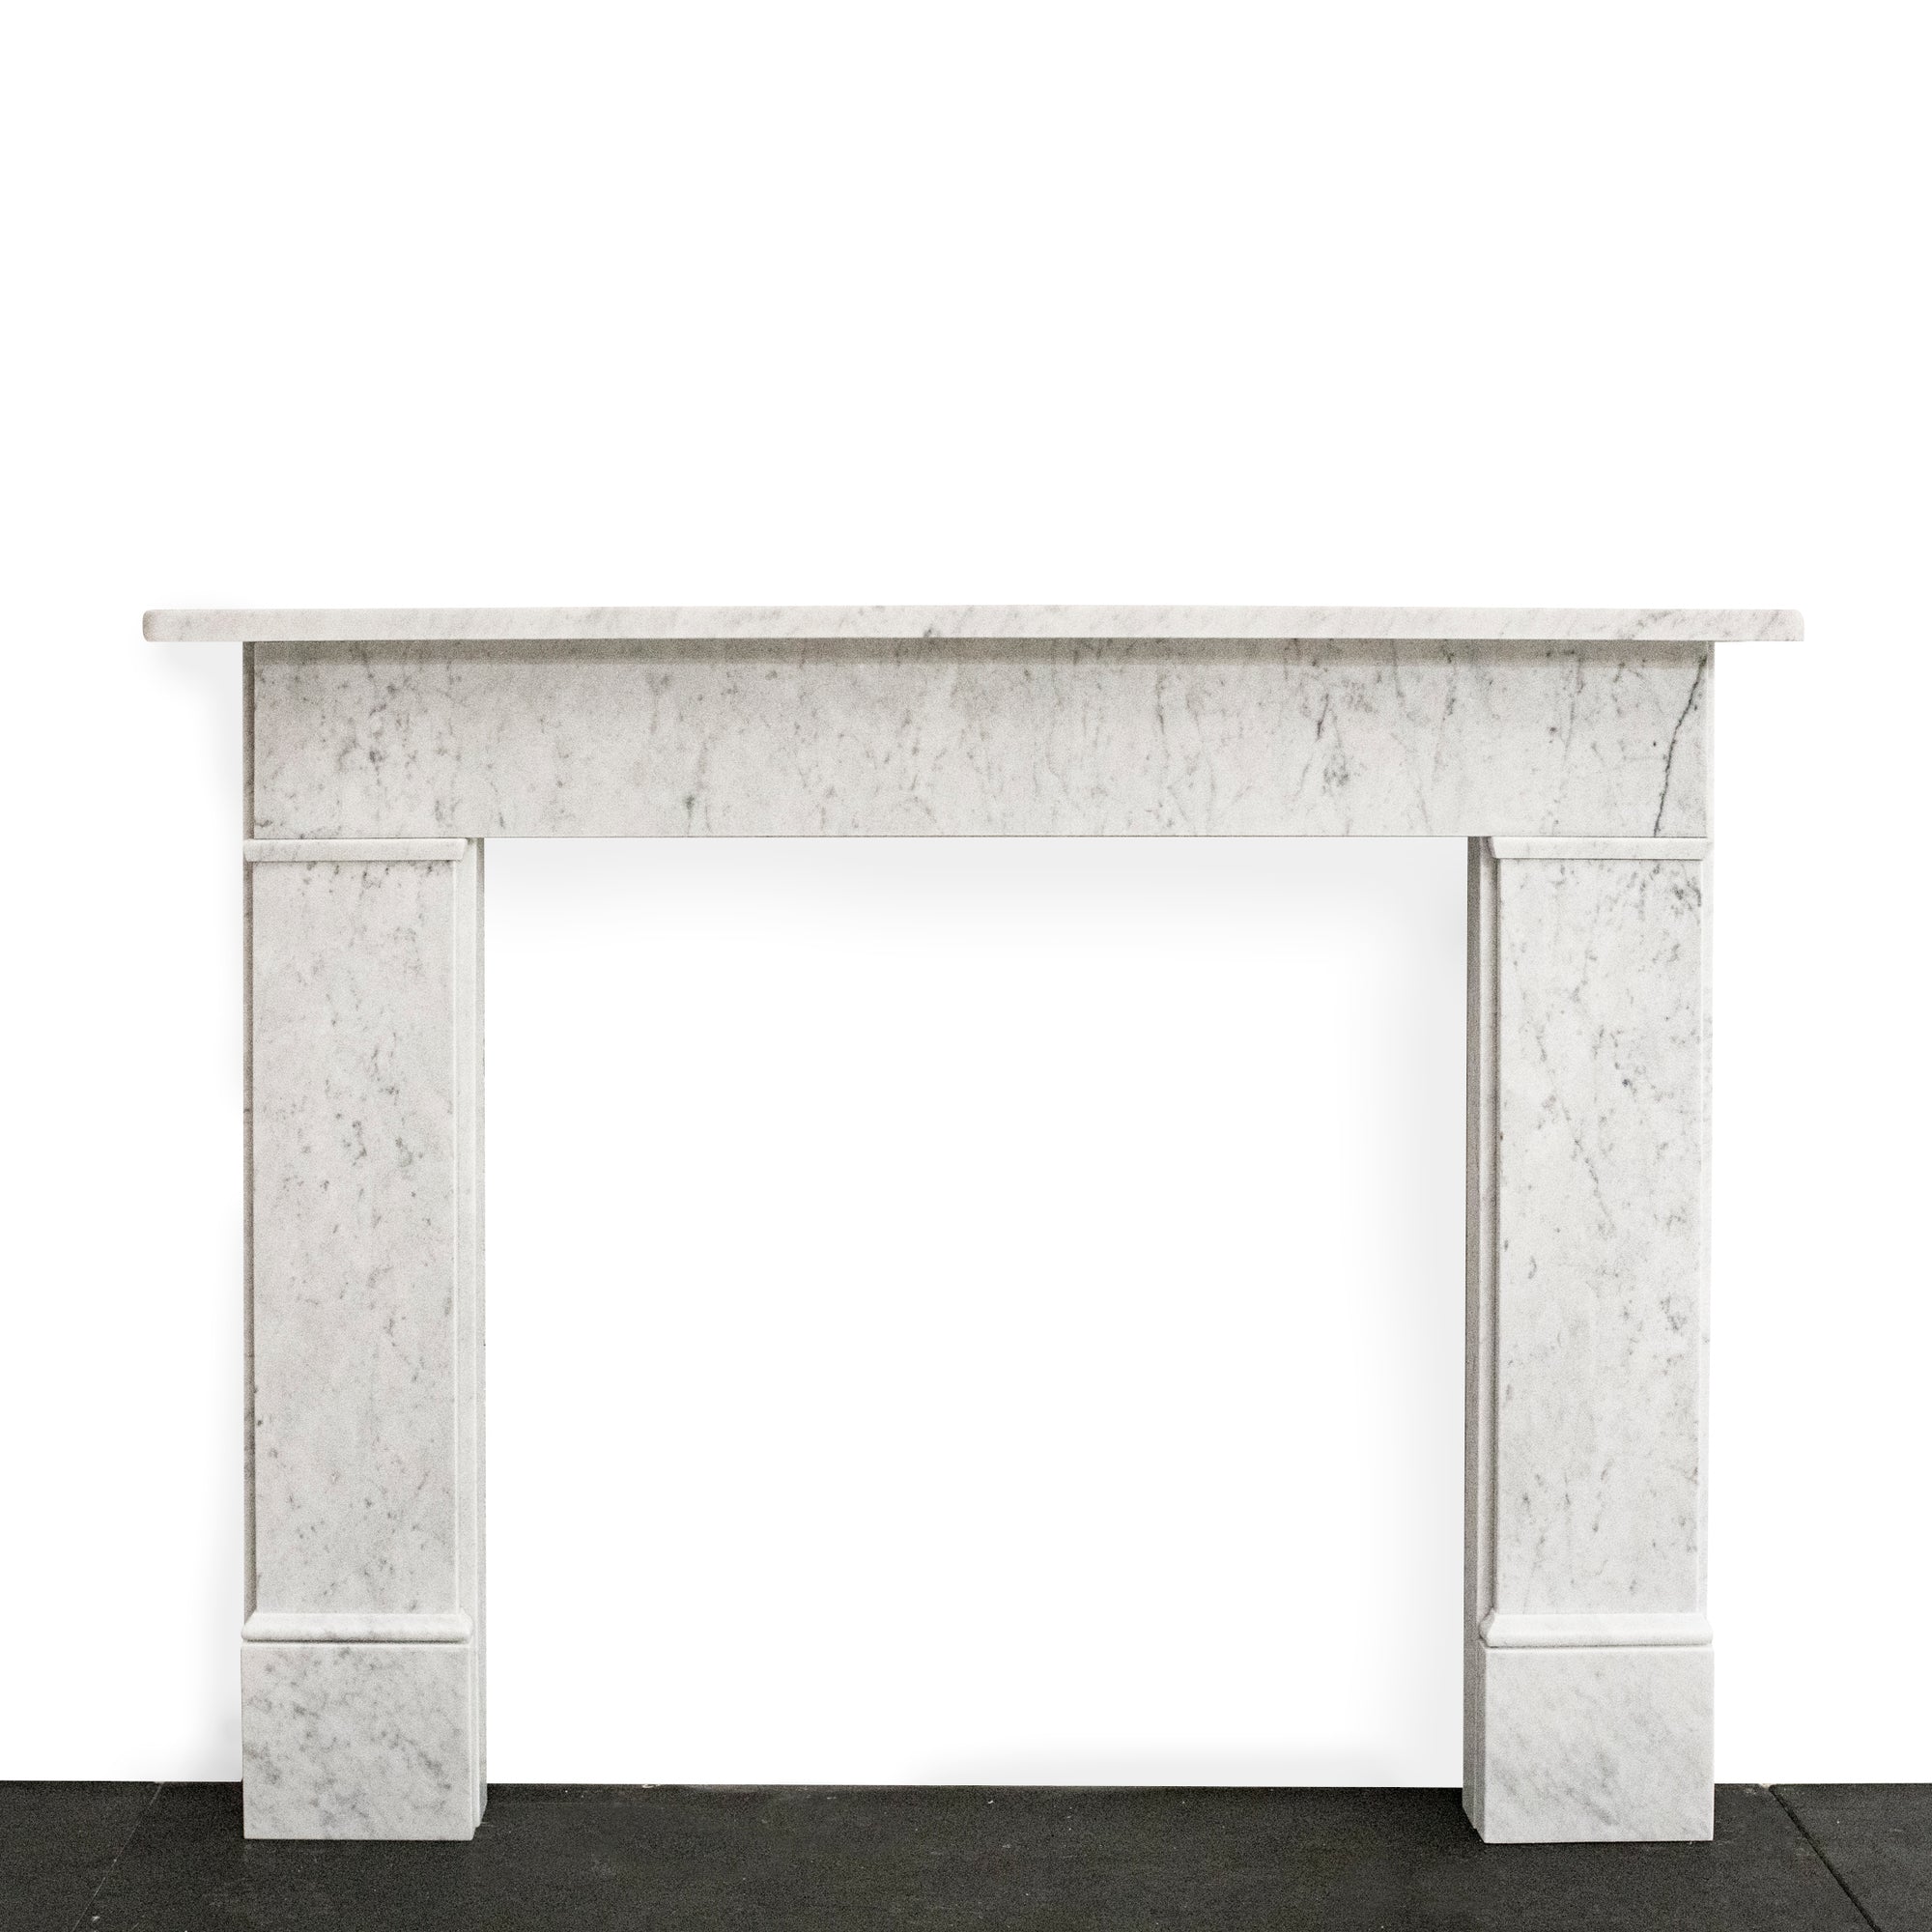 Early Edwardian, Late Georgian Style Carrara Marble Fire Surround | The Architectural Forum